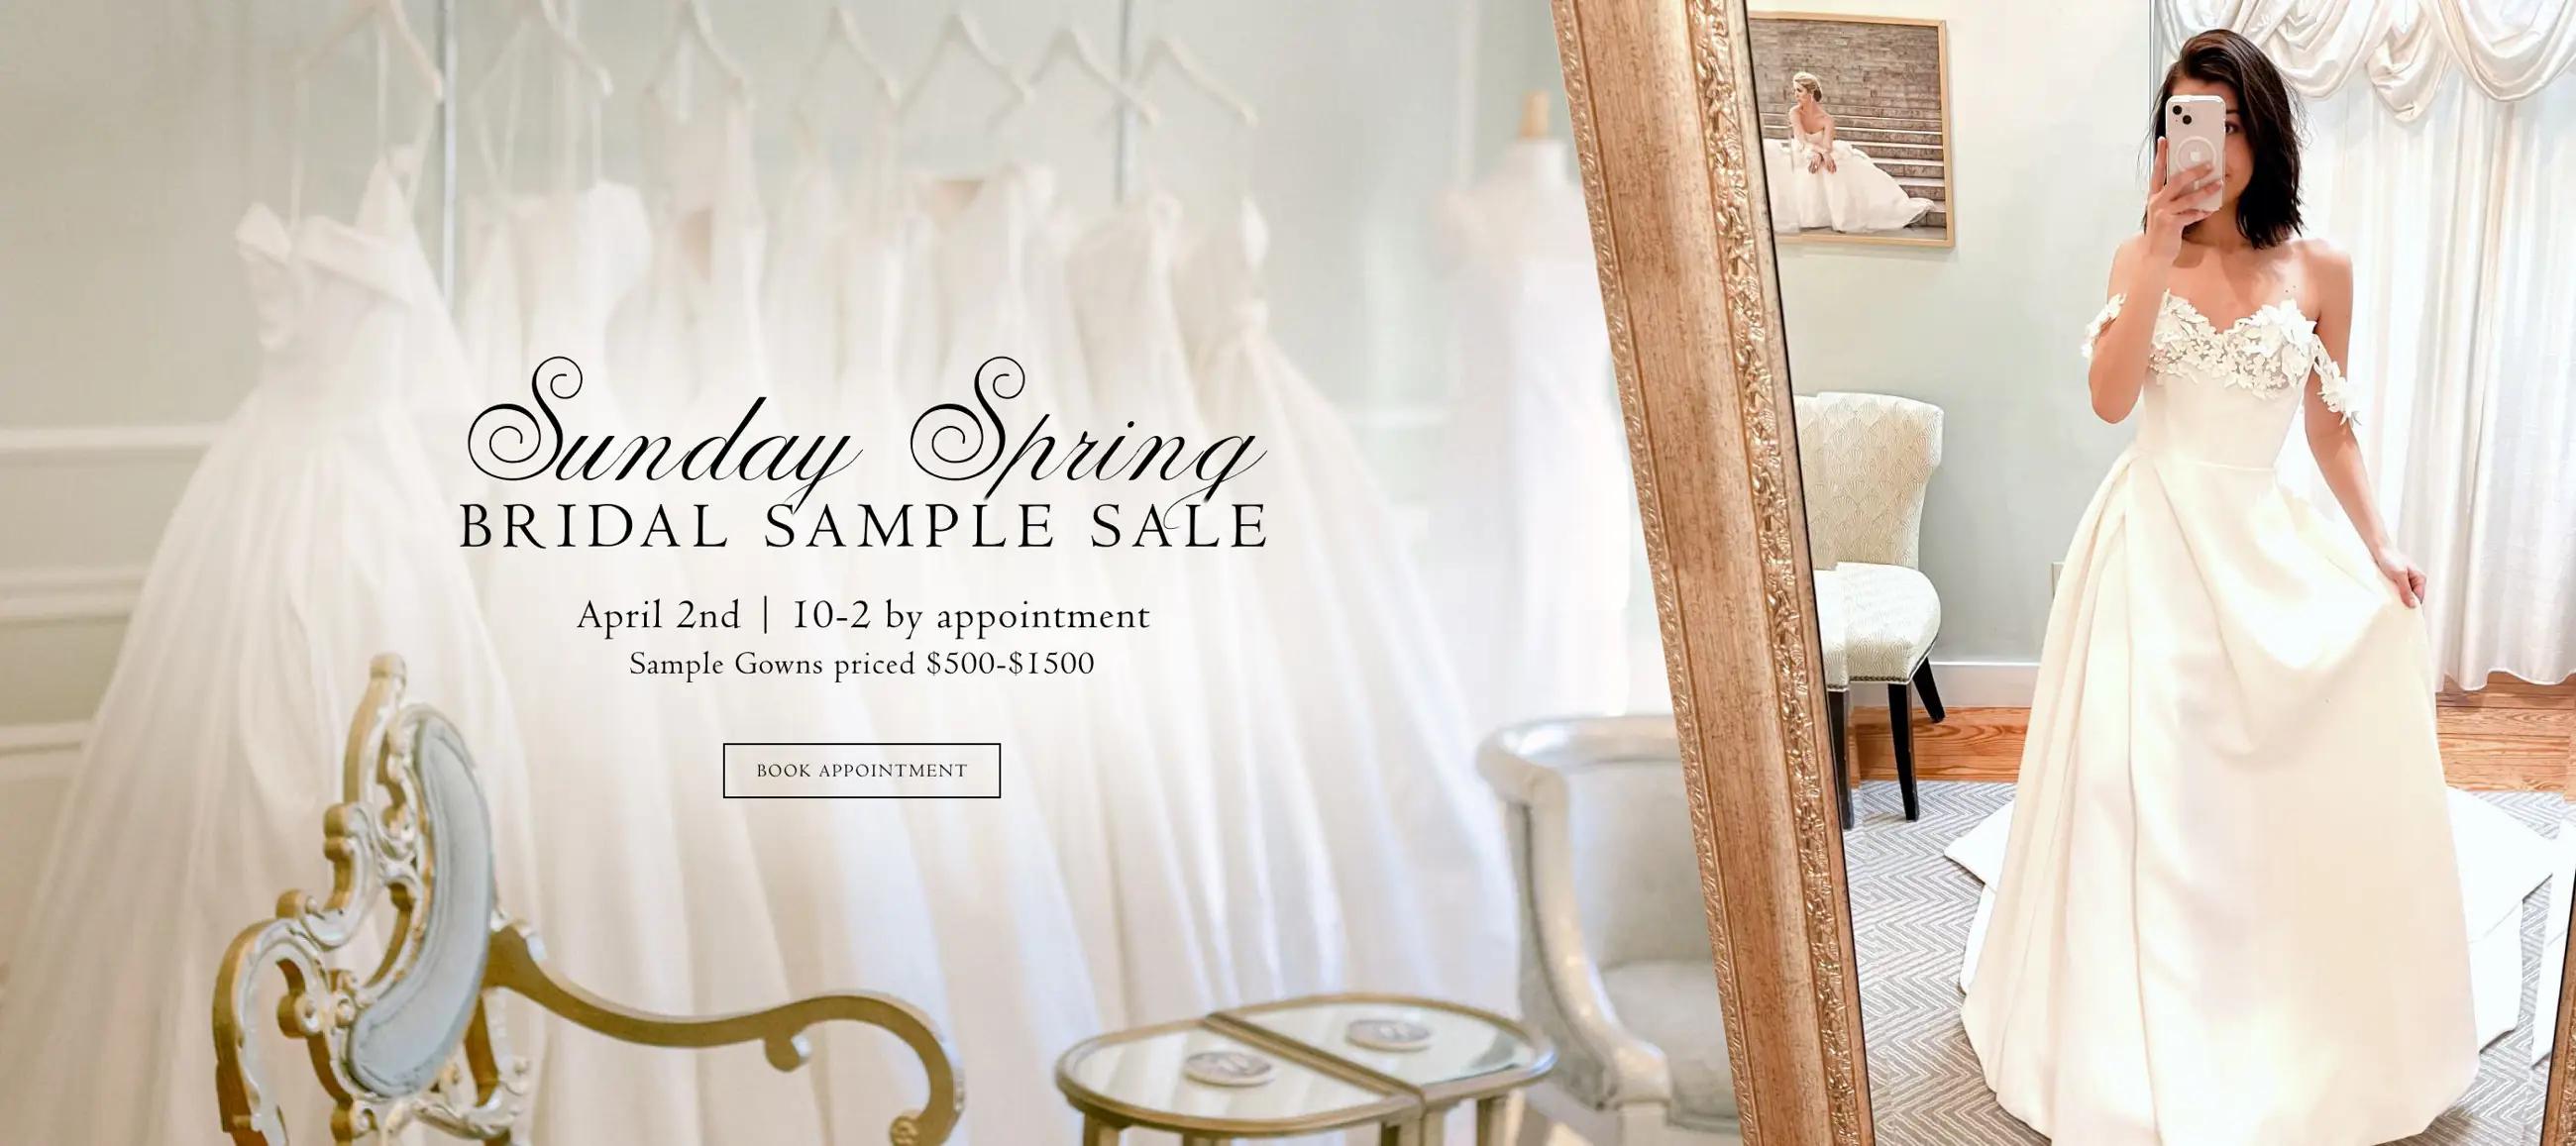 Sunday Spring Sample Sale at White Dress by the Shore